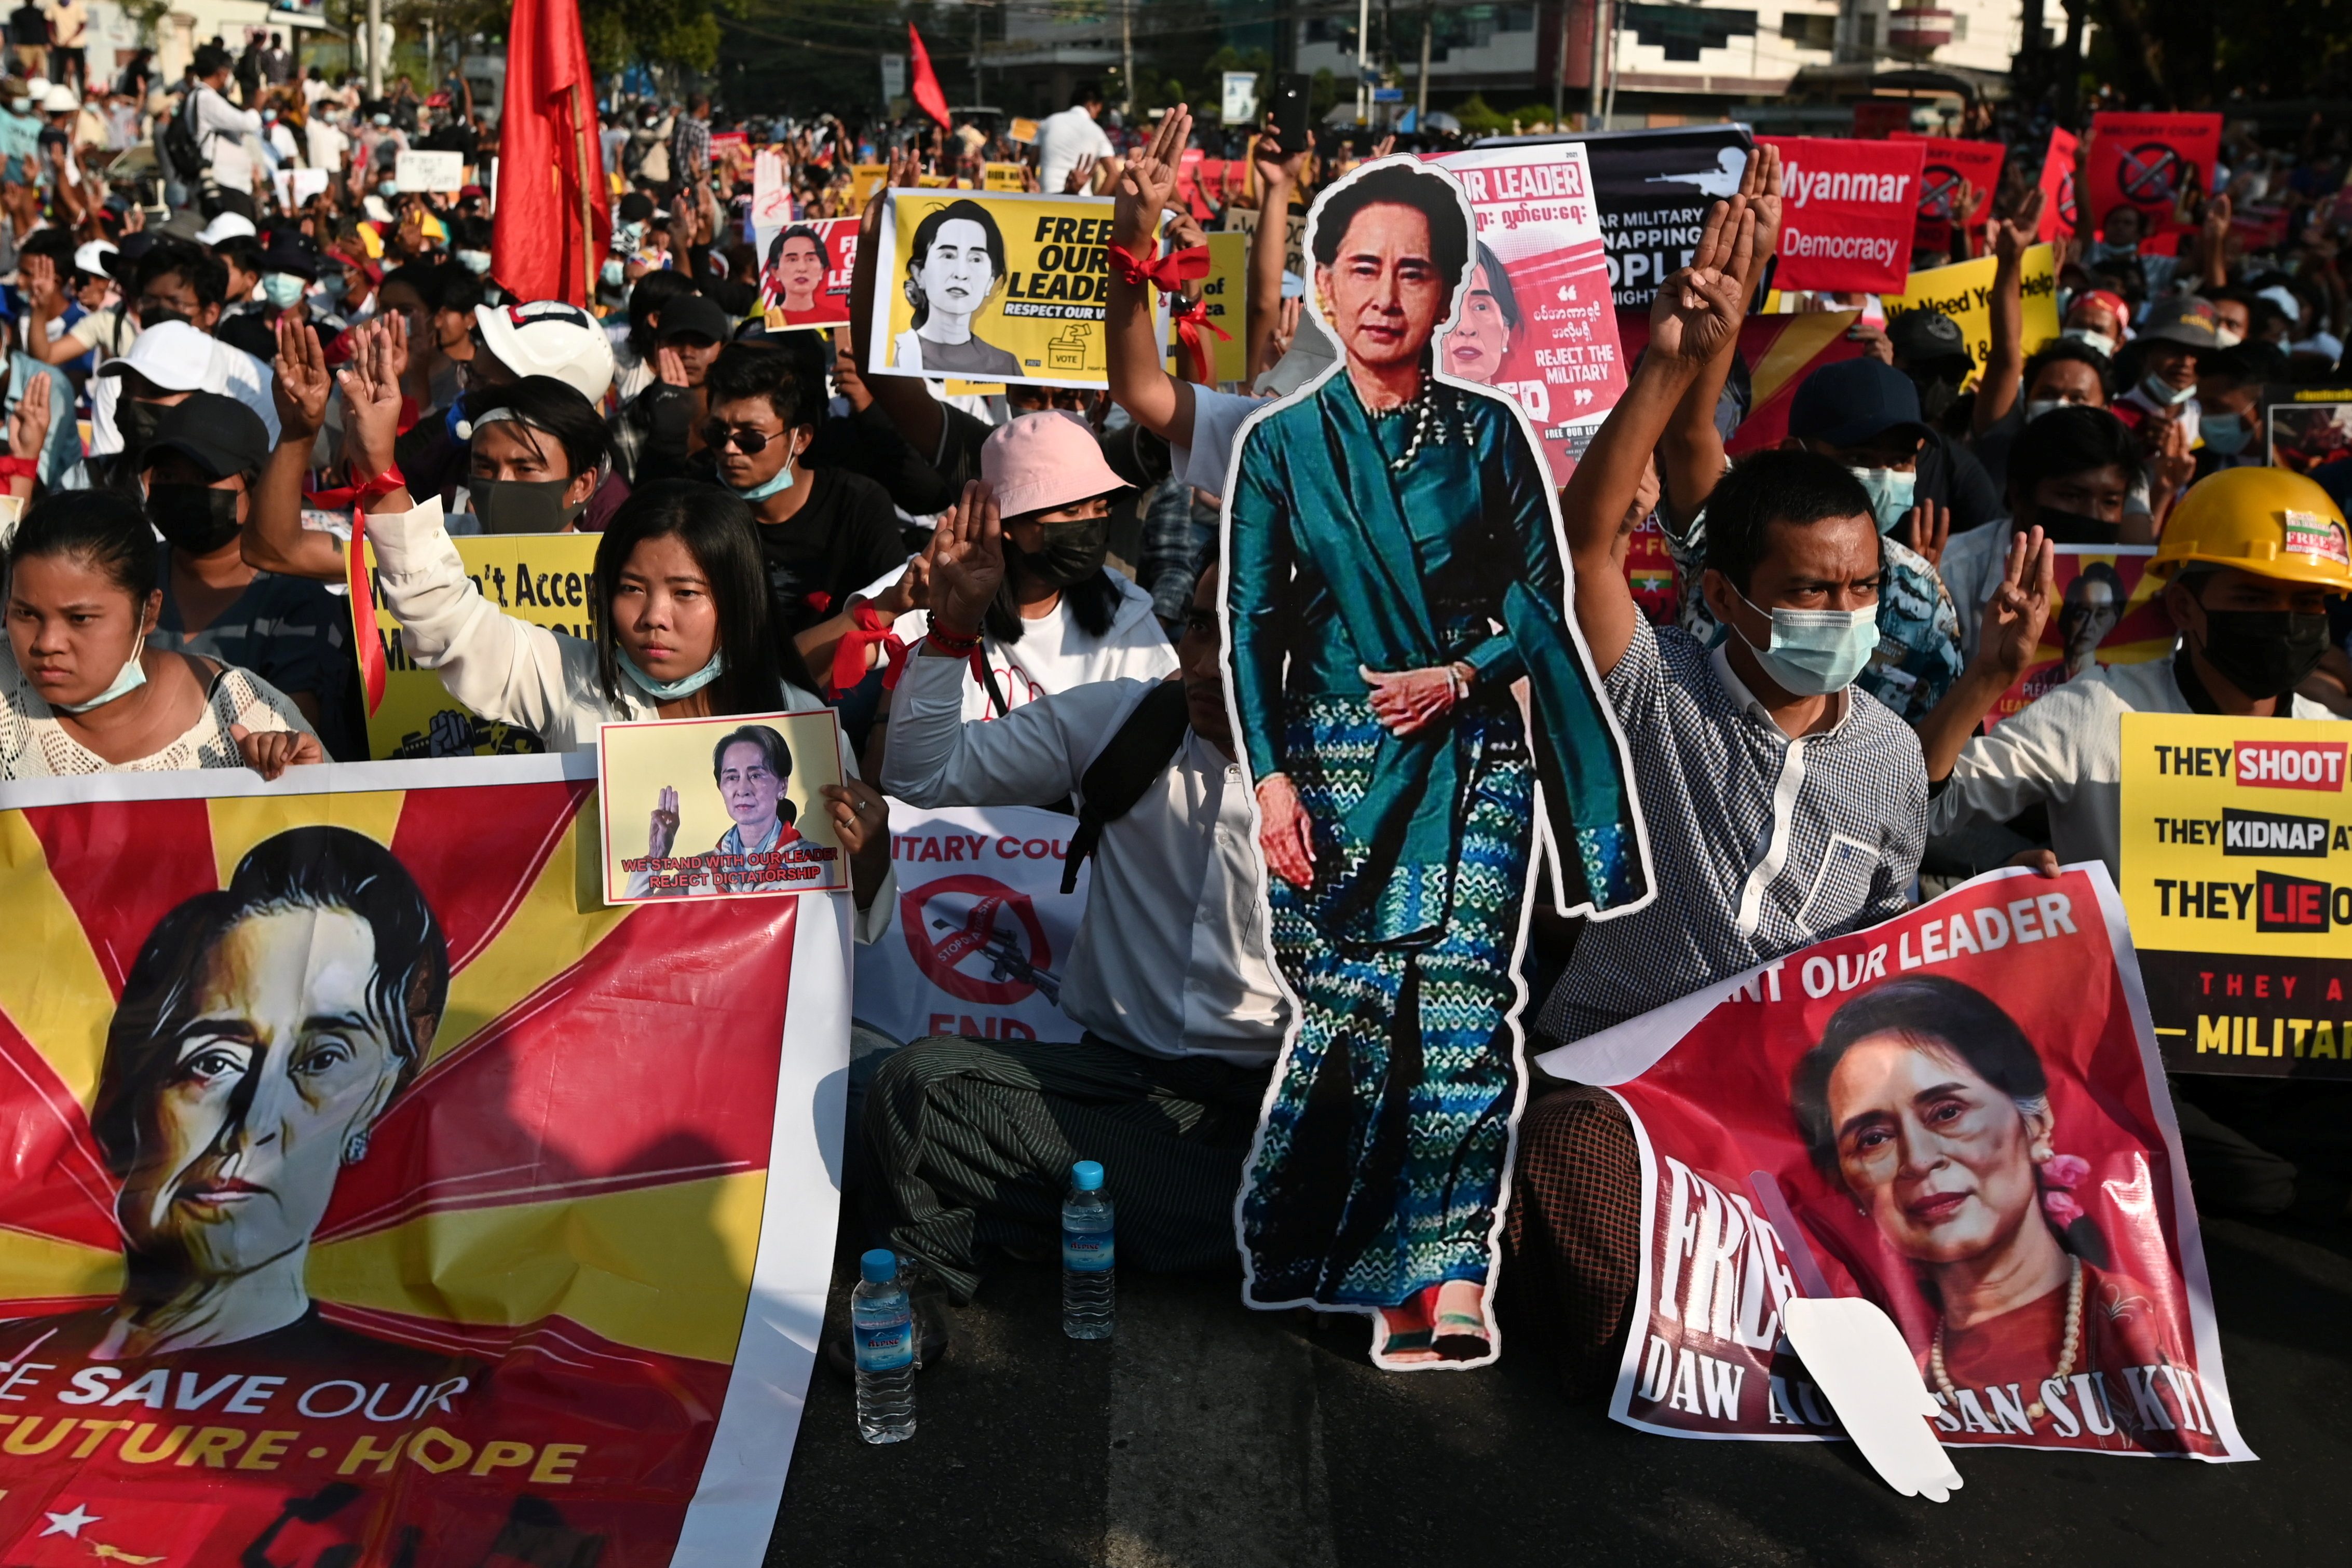 Myanmar police file additional charge against Aung San Suu Kyi – lawyer